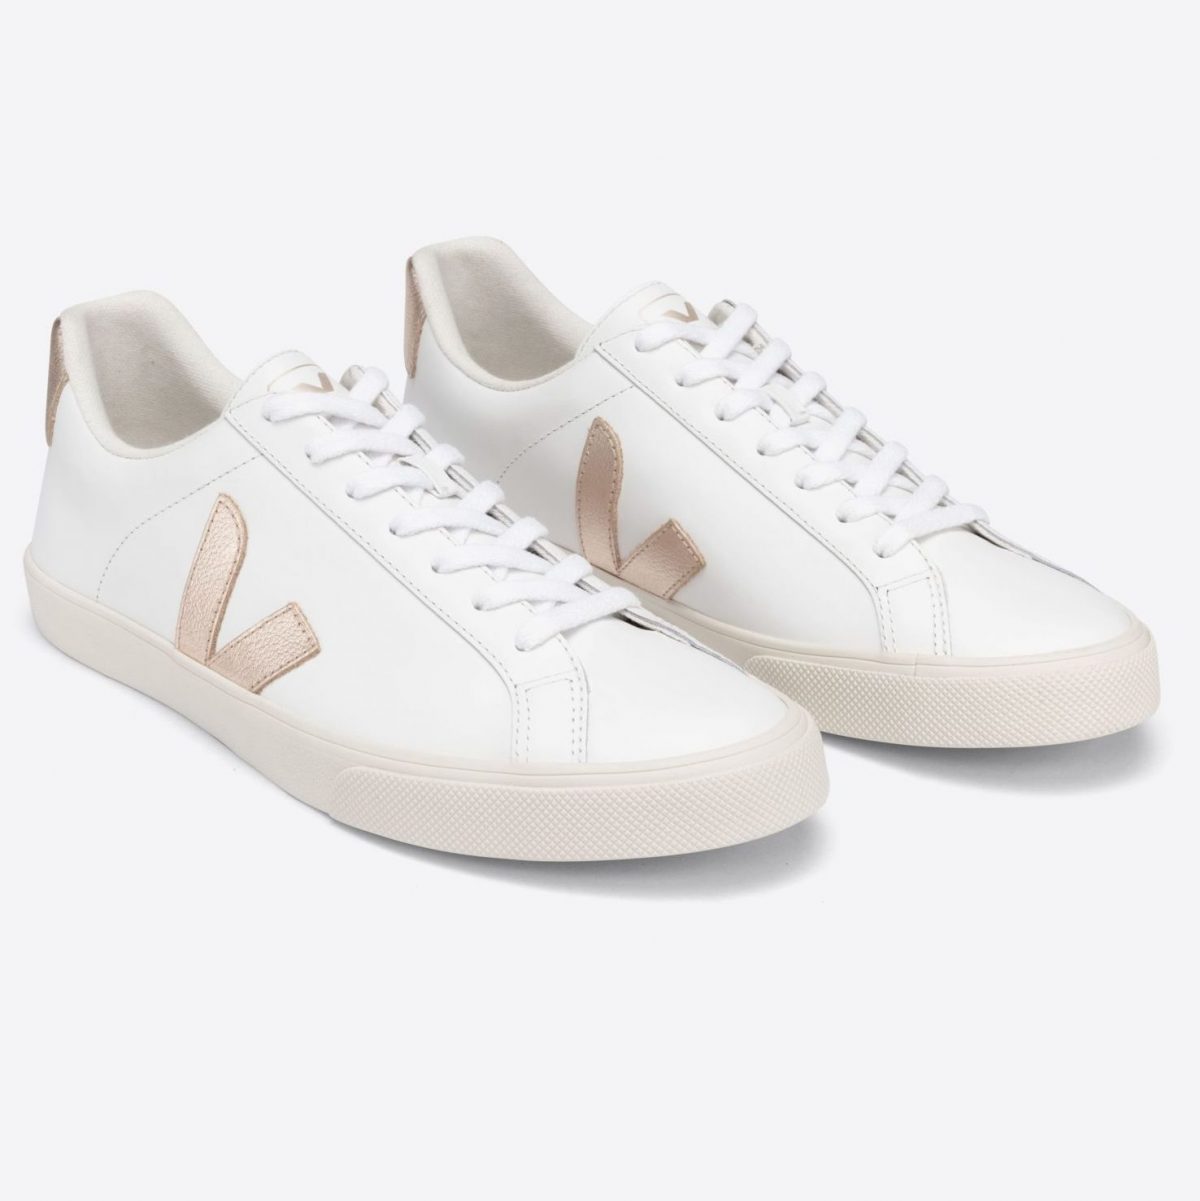 Buy white sneakers Online & Get up to 80% Off | Myntra